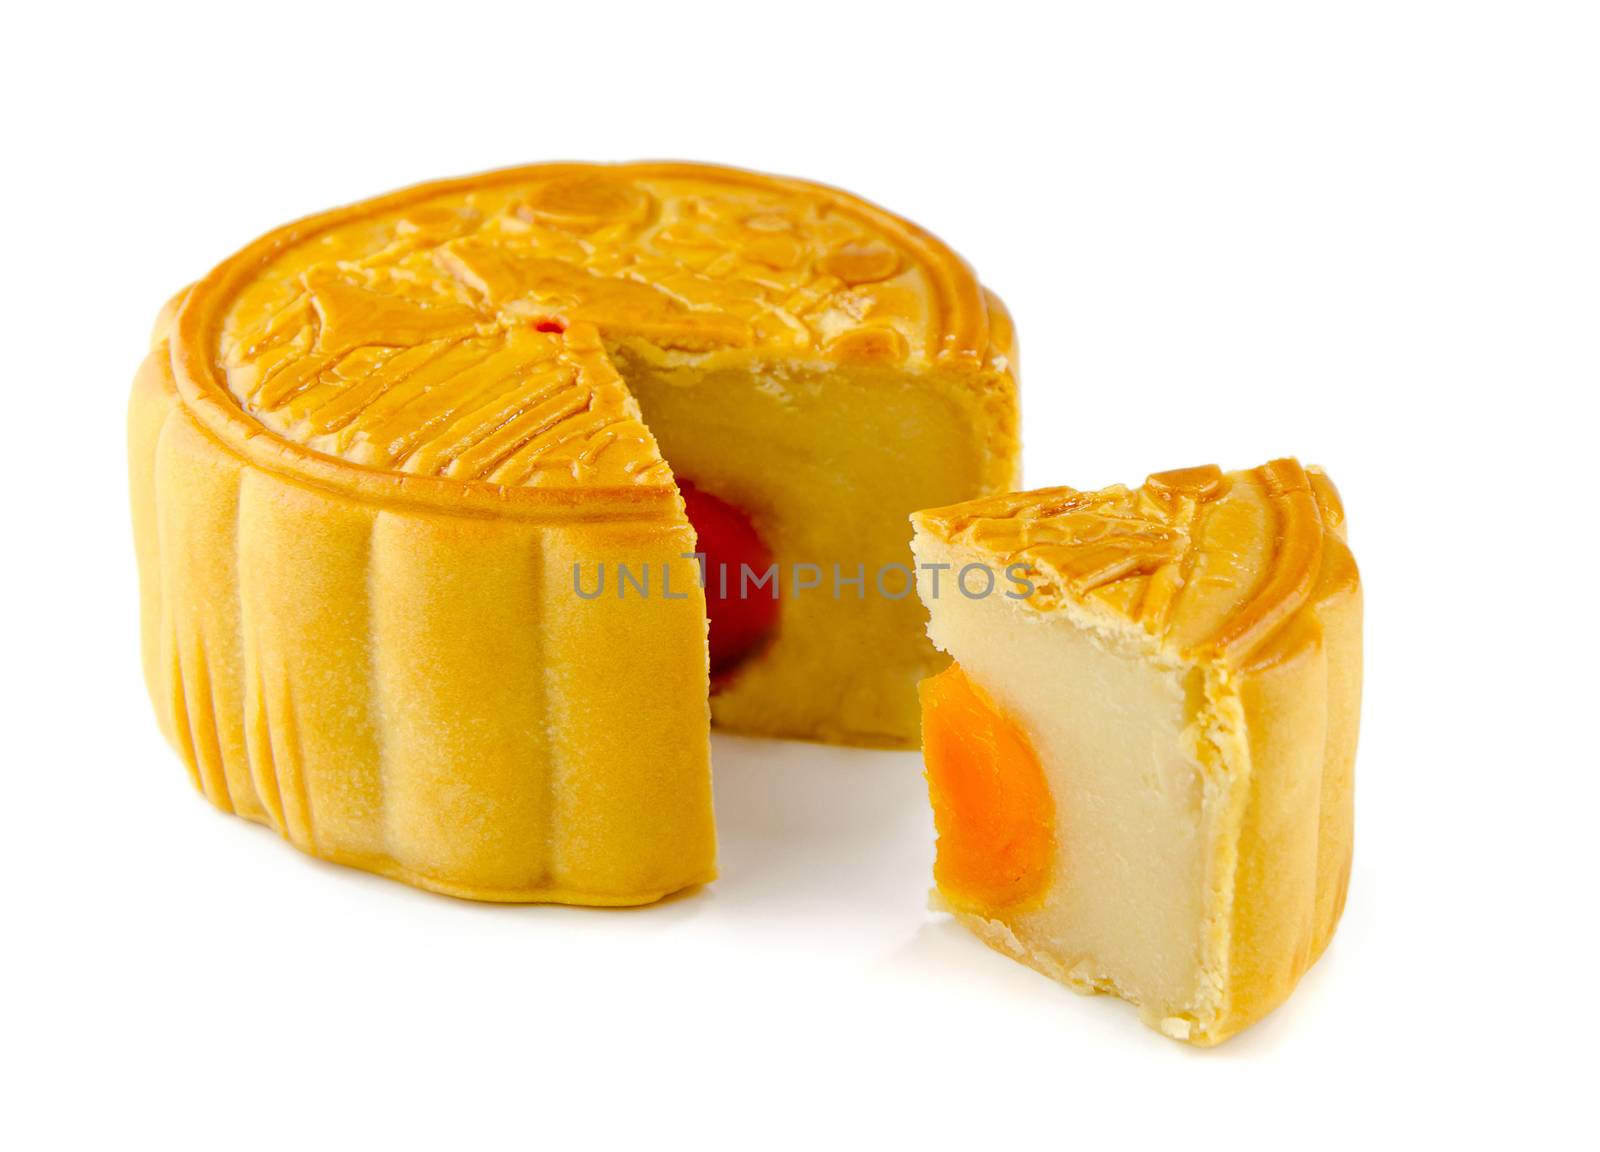 Closeup Moon cakes Isolated on White Background